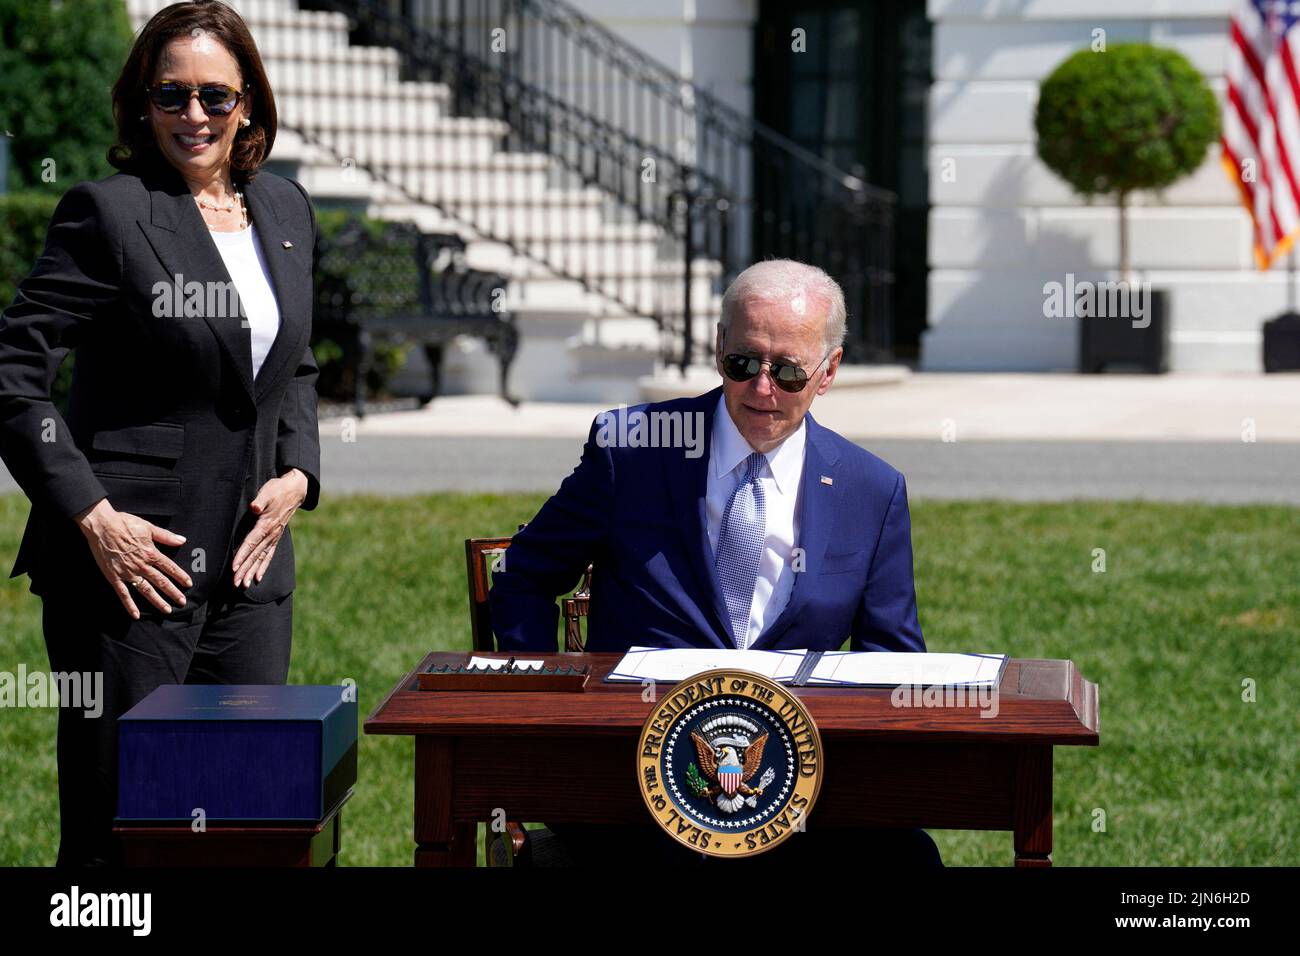 U.S. President Joe Biden next to Vice President Kamala Harris prepares to sign into law the CHIPS and Science Act during a ceremony on the South Lawn of the White House in Washington on August 9, 2022. Photo by Yuri Gripas/ABACAPRESS.COM Stock Photo